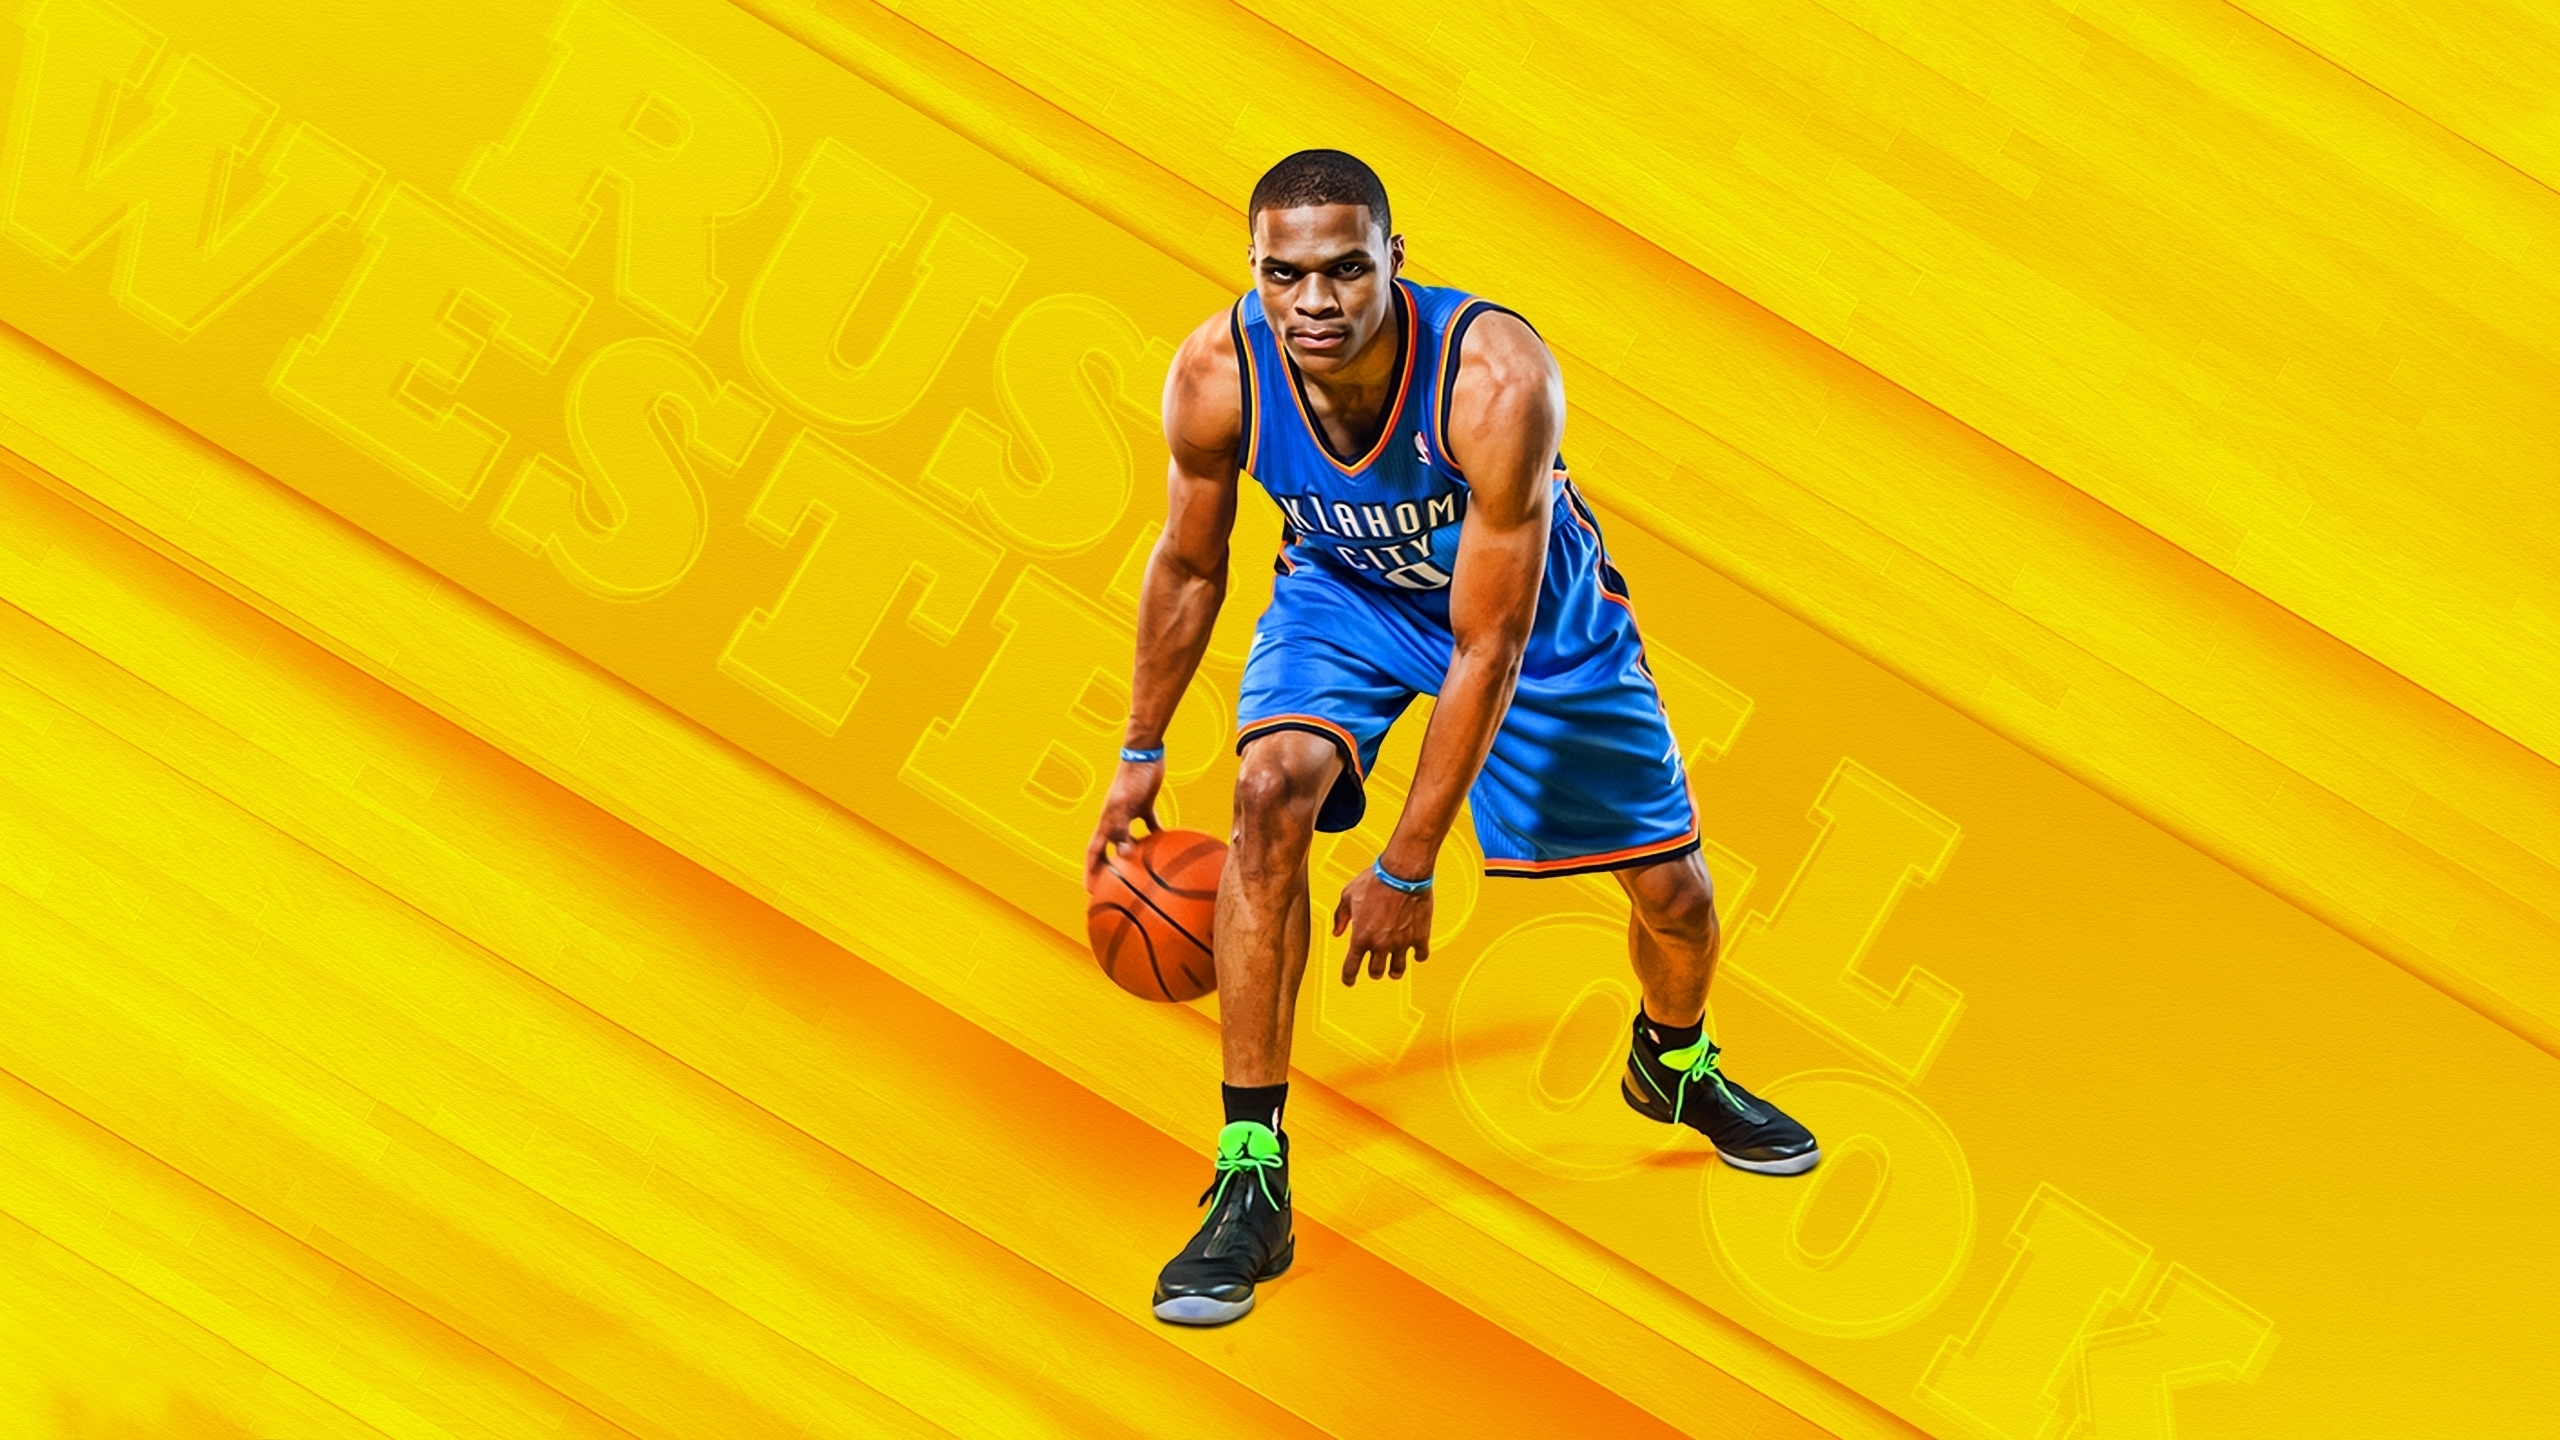 Russell Westbrook for 2560x1440 HDTV resolution